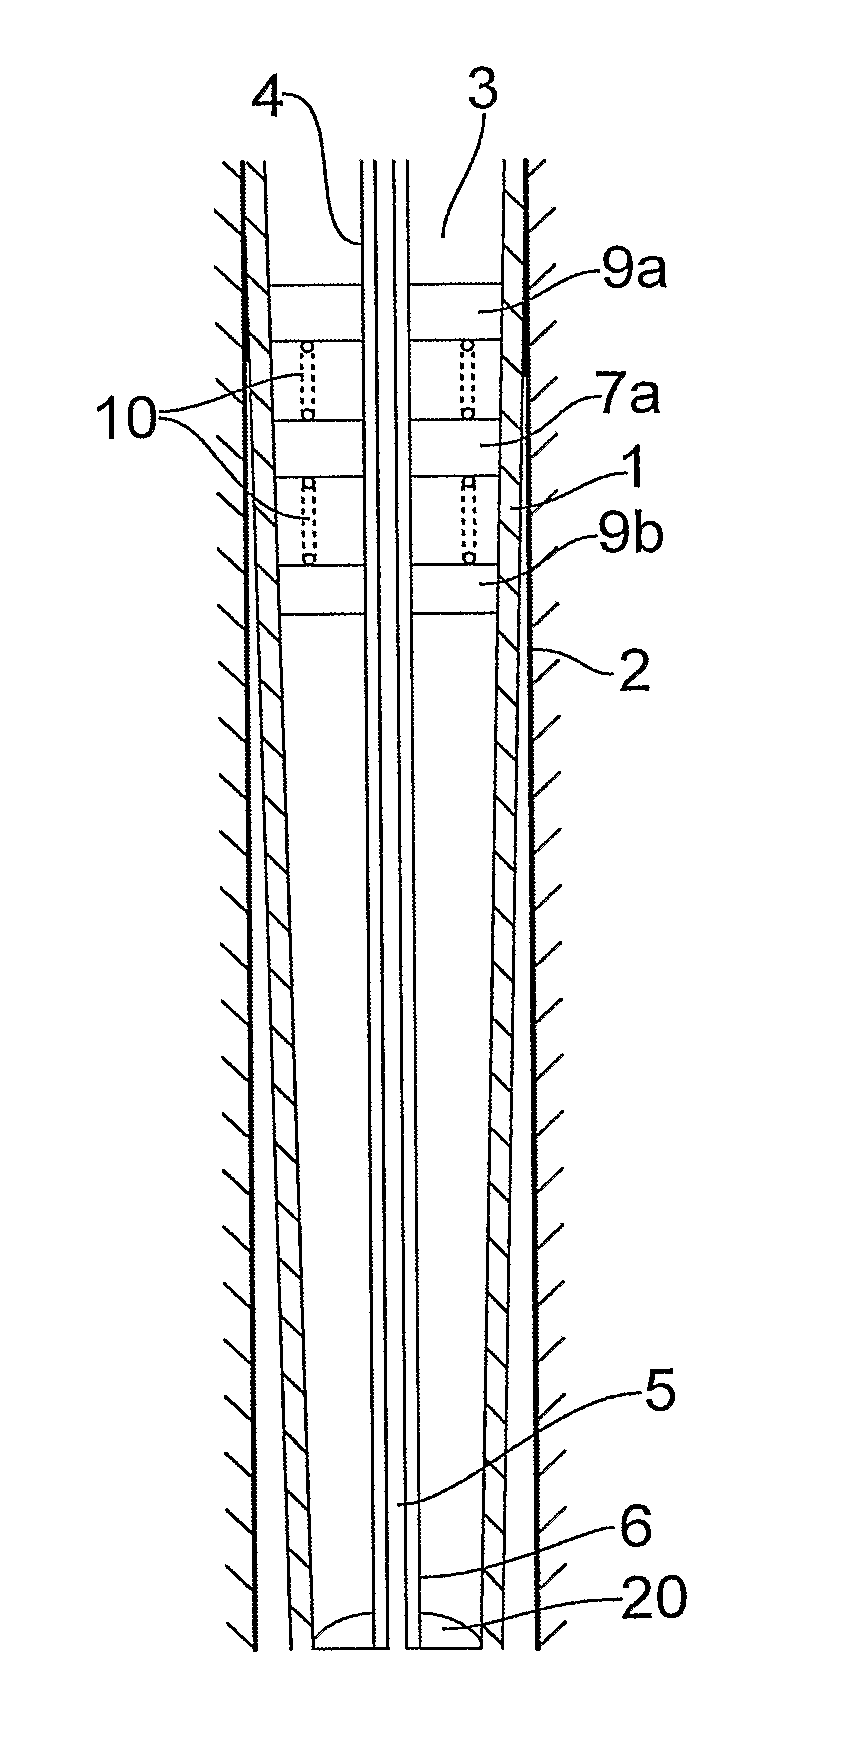 Down hole well tool with expansion tool